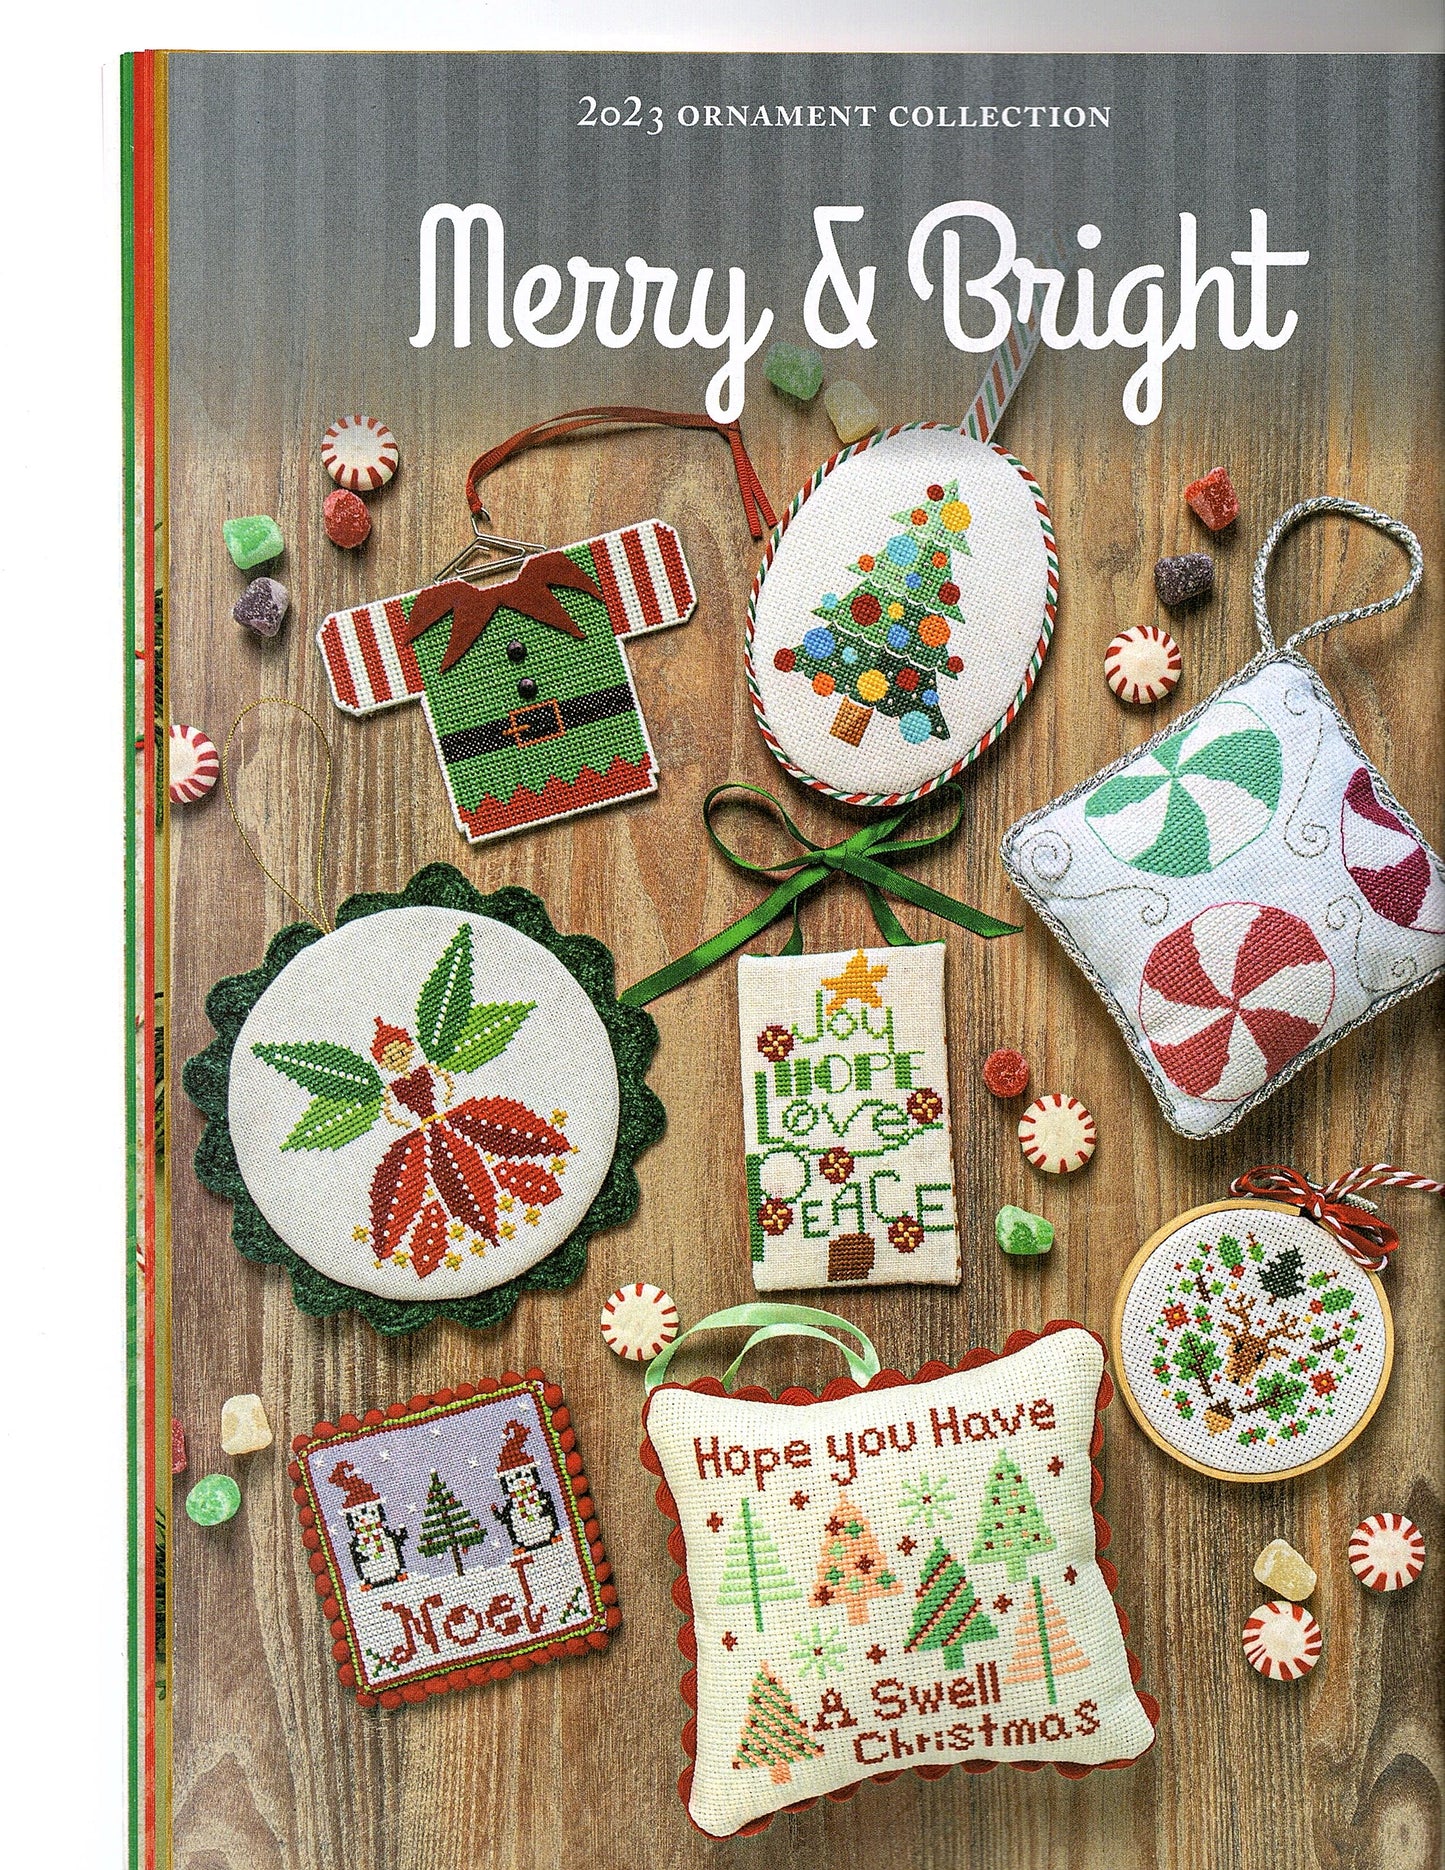 Just Cross Stitch Magazine Special Edition - Ornament Issue